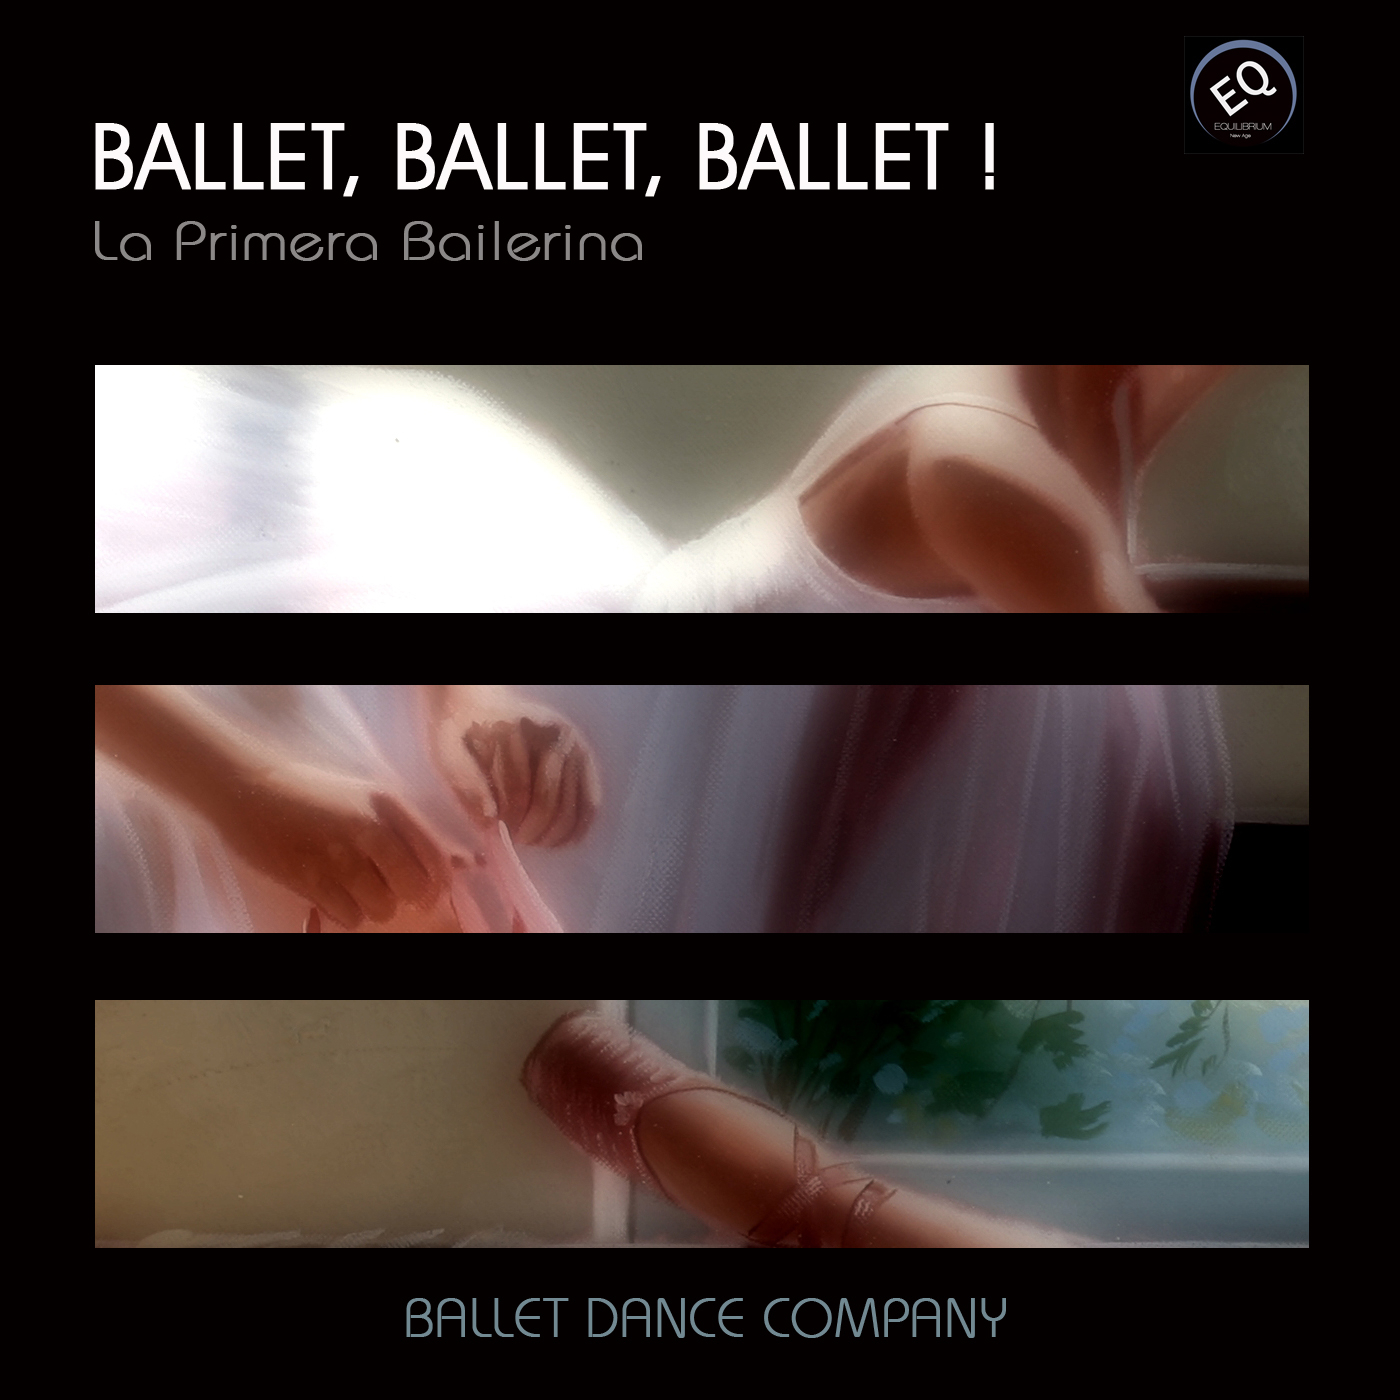 Kids - Ballet Songs for Children - Musical Preparation Given for This Track